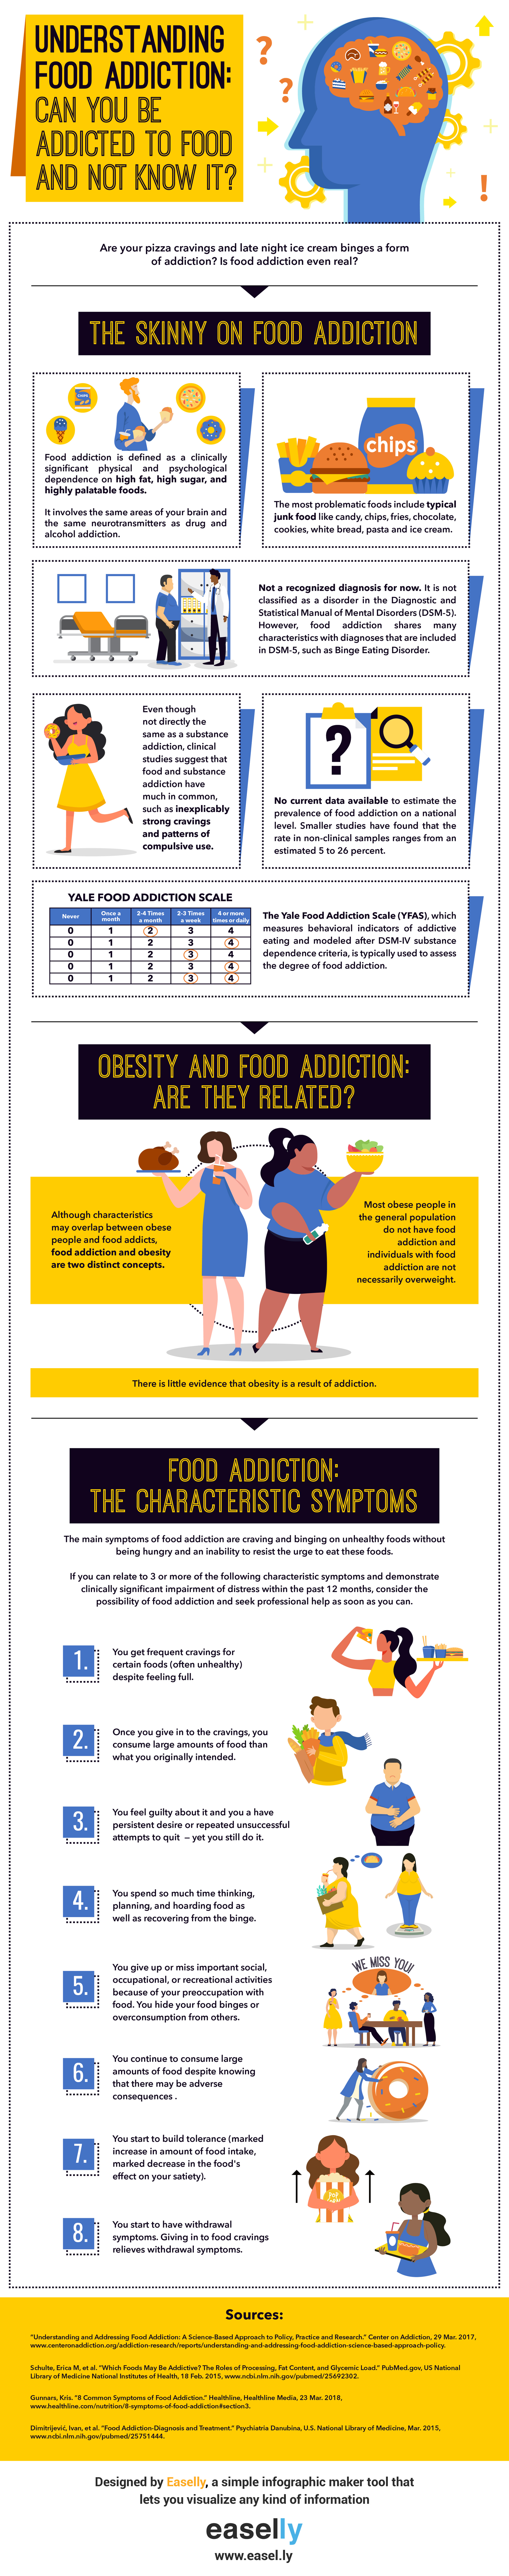 infographic about food addiction and its symptoms